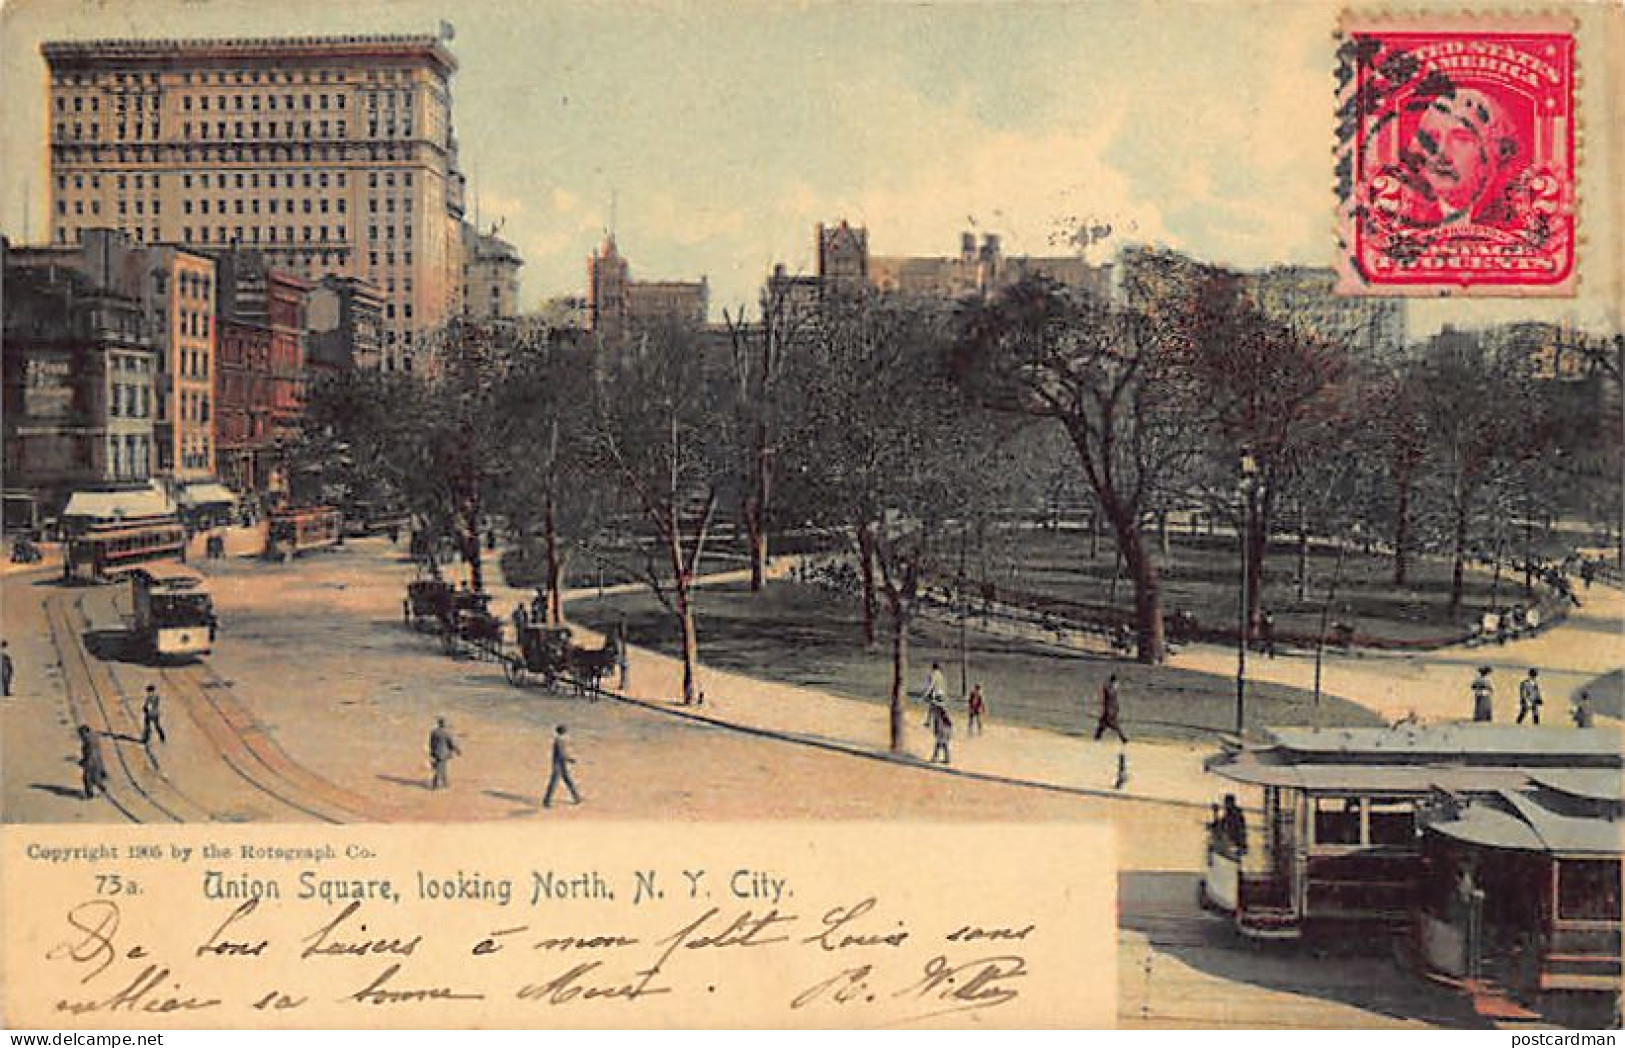 Usa - NEW YORK CITY - Union Square, Looking North - Publ. The Rotograph Co. 73 - Union Square